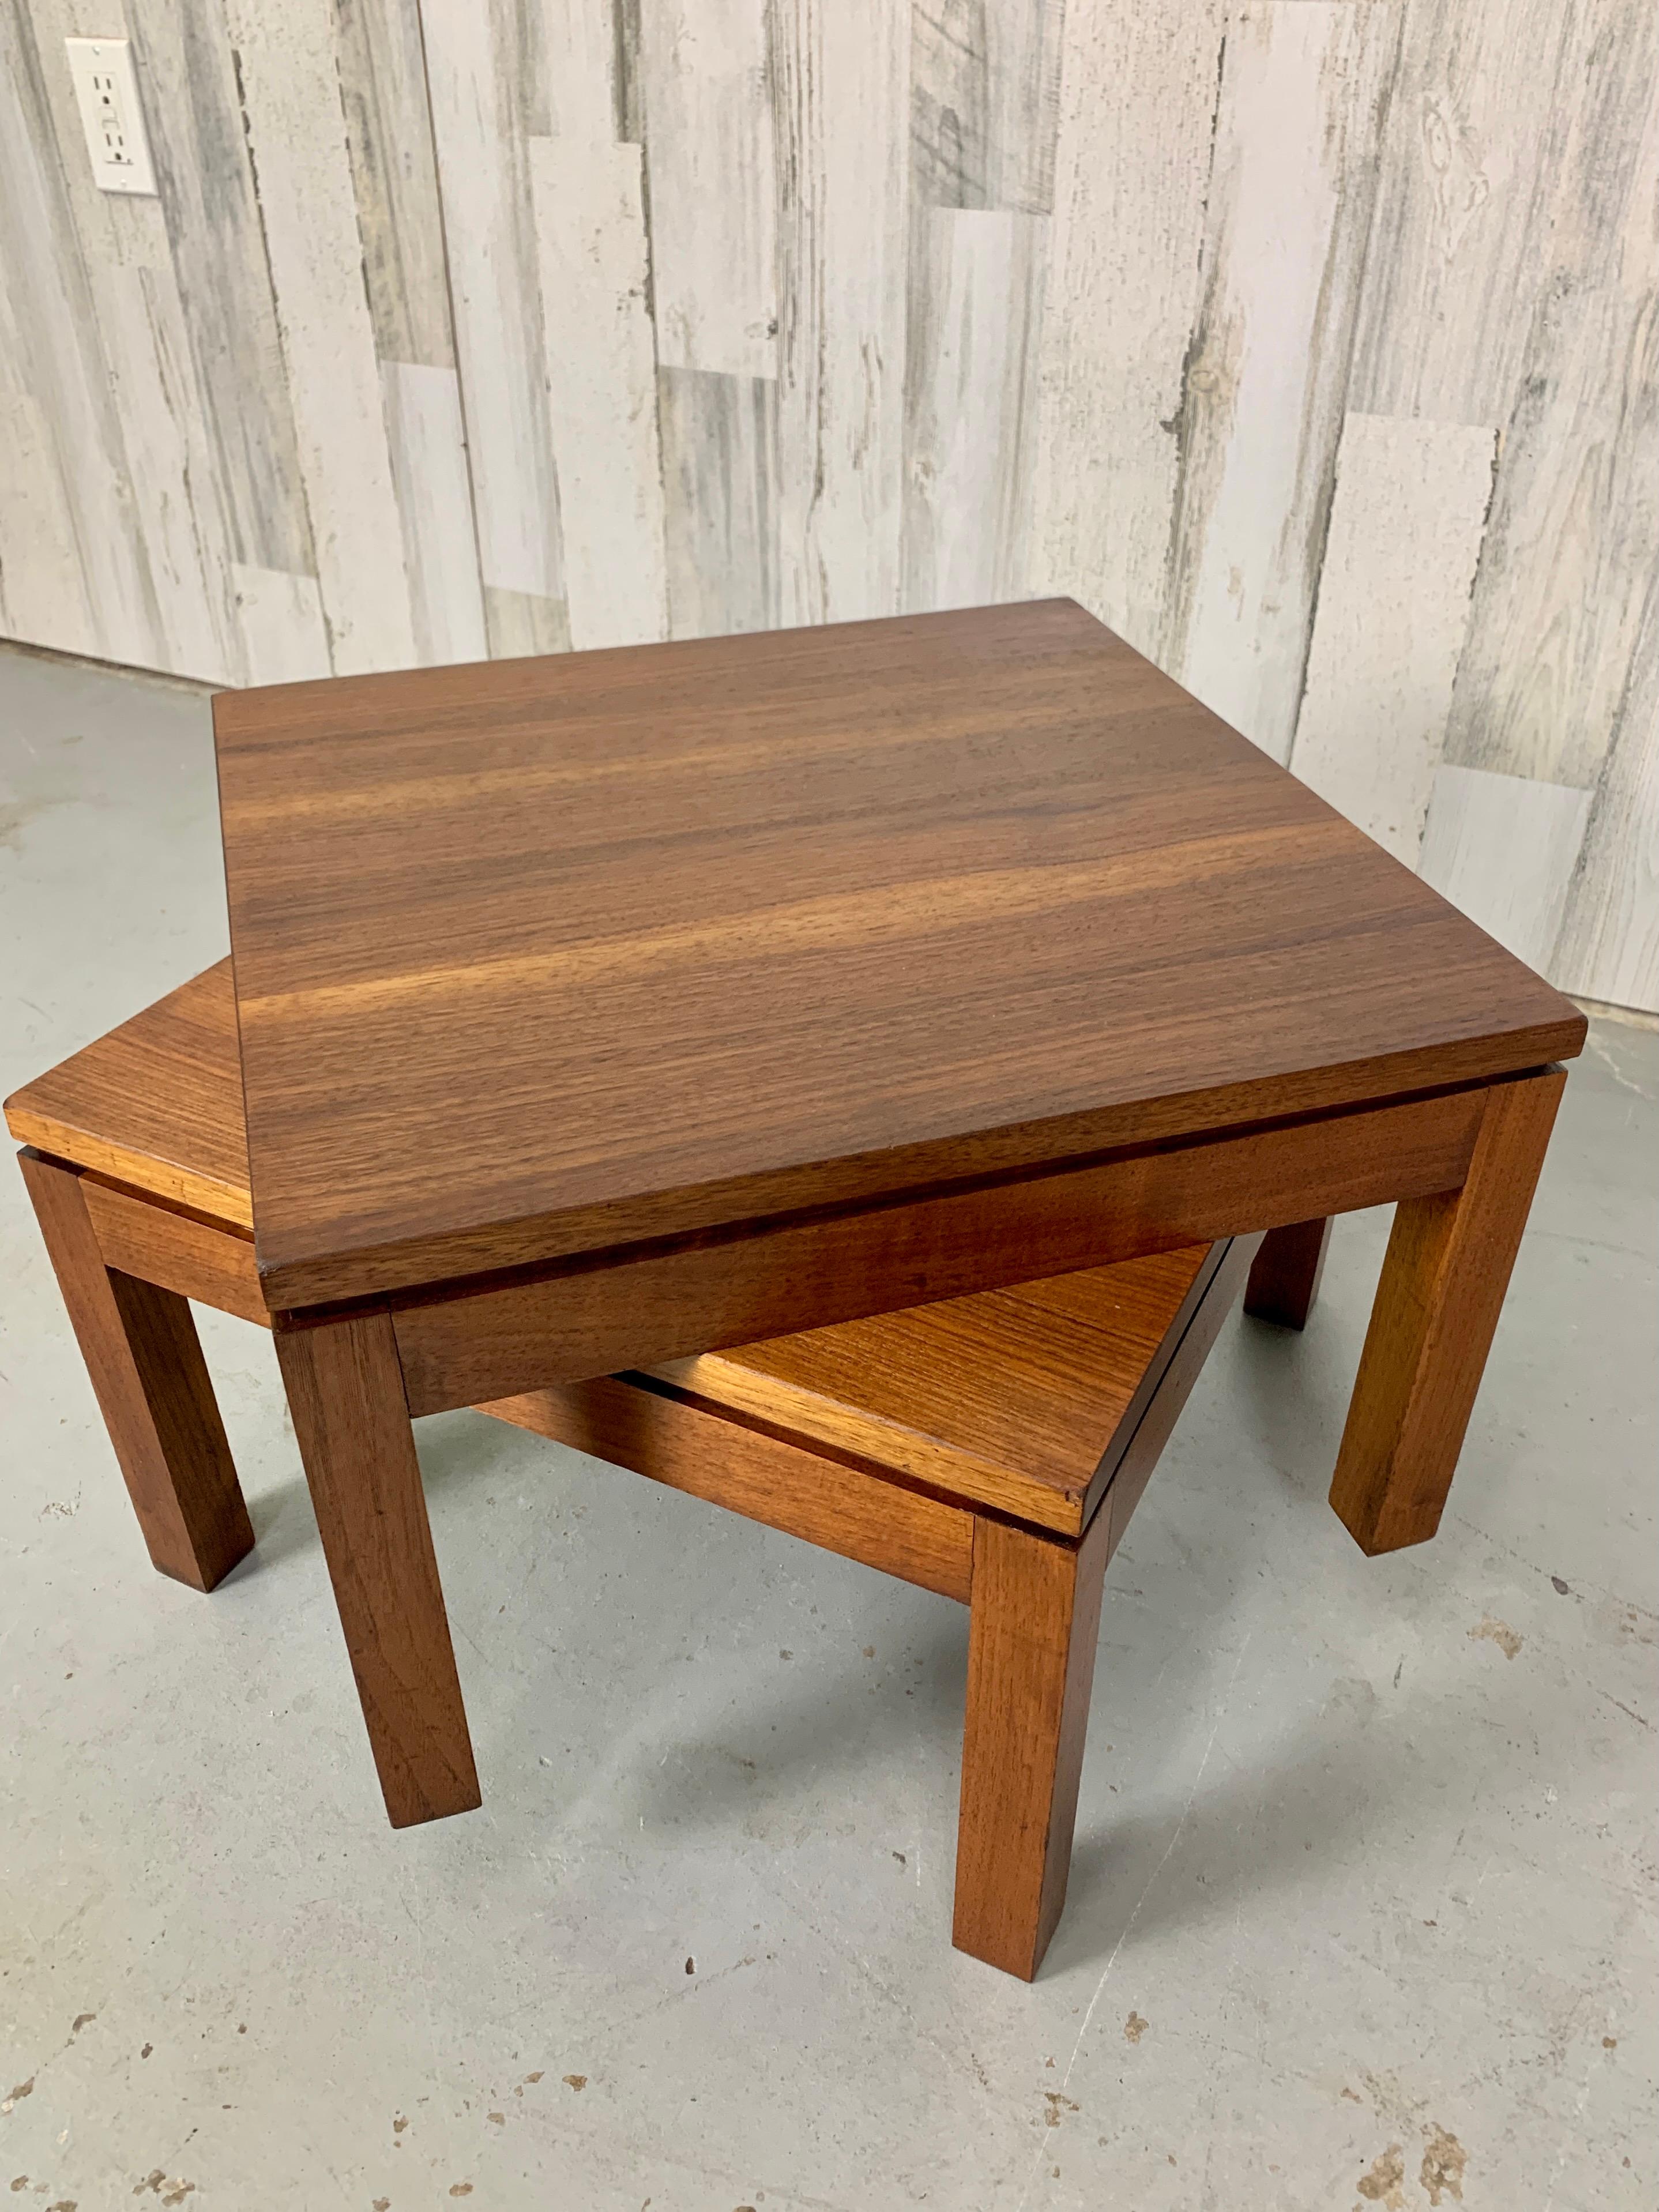 Pair of solid walnut Parsons style side tables that can be used as stacking tables or stools.